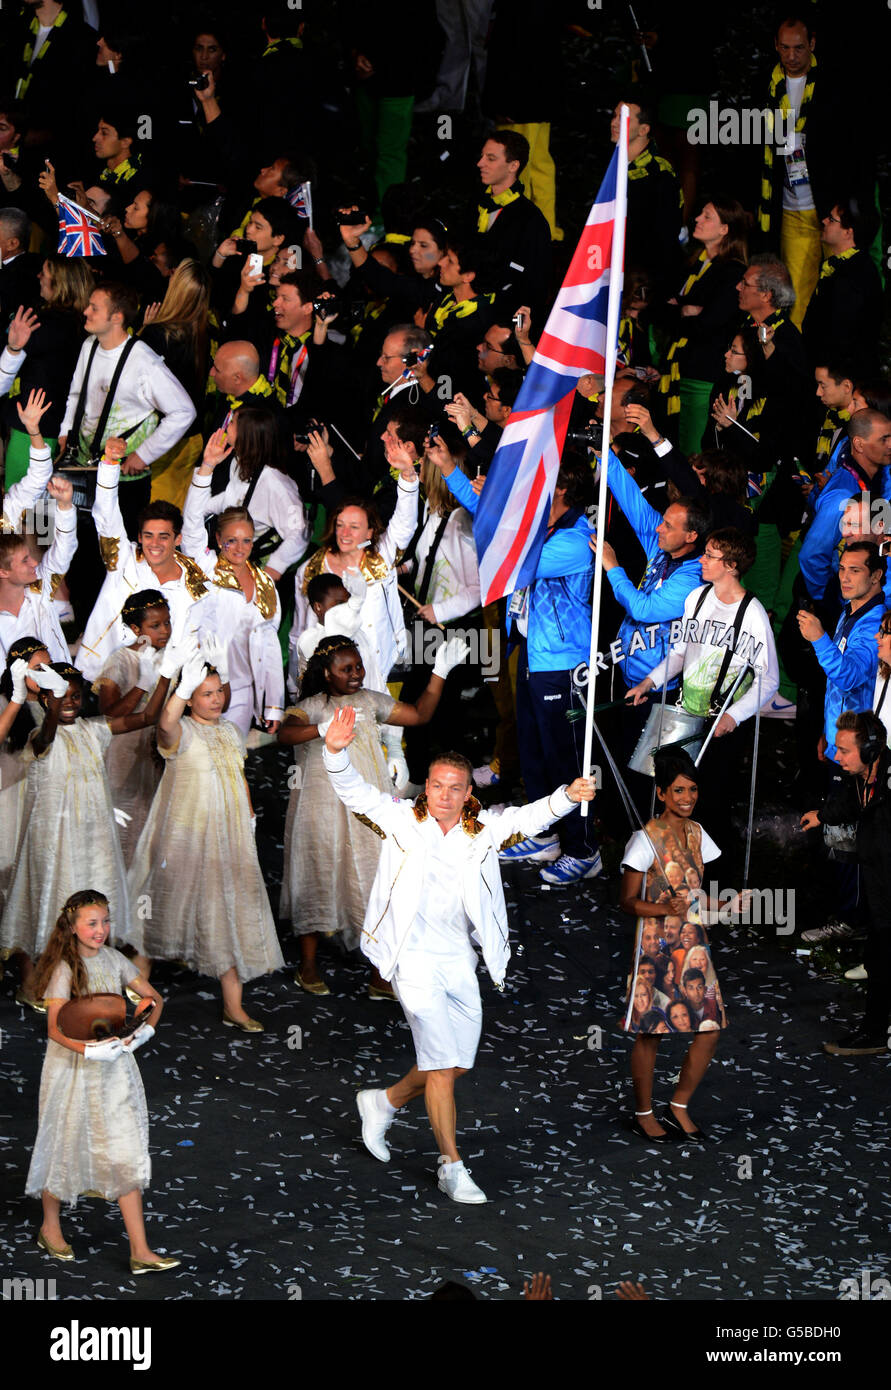 Great Britain's Sir Chris Hoy carrying the Britsh flag leads the teamduring the London Olympic Games 2012 Opening Ceremony at the Olympic Stadium, London. Stock Photo